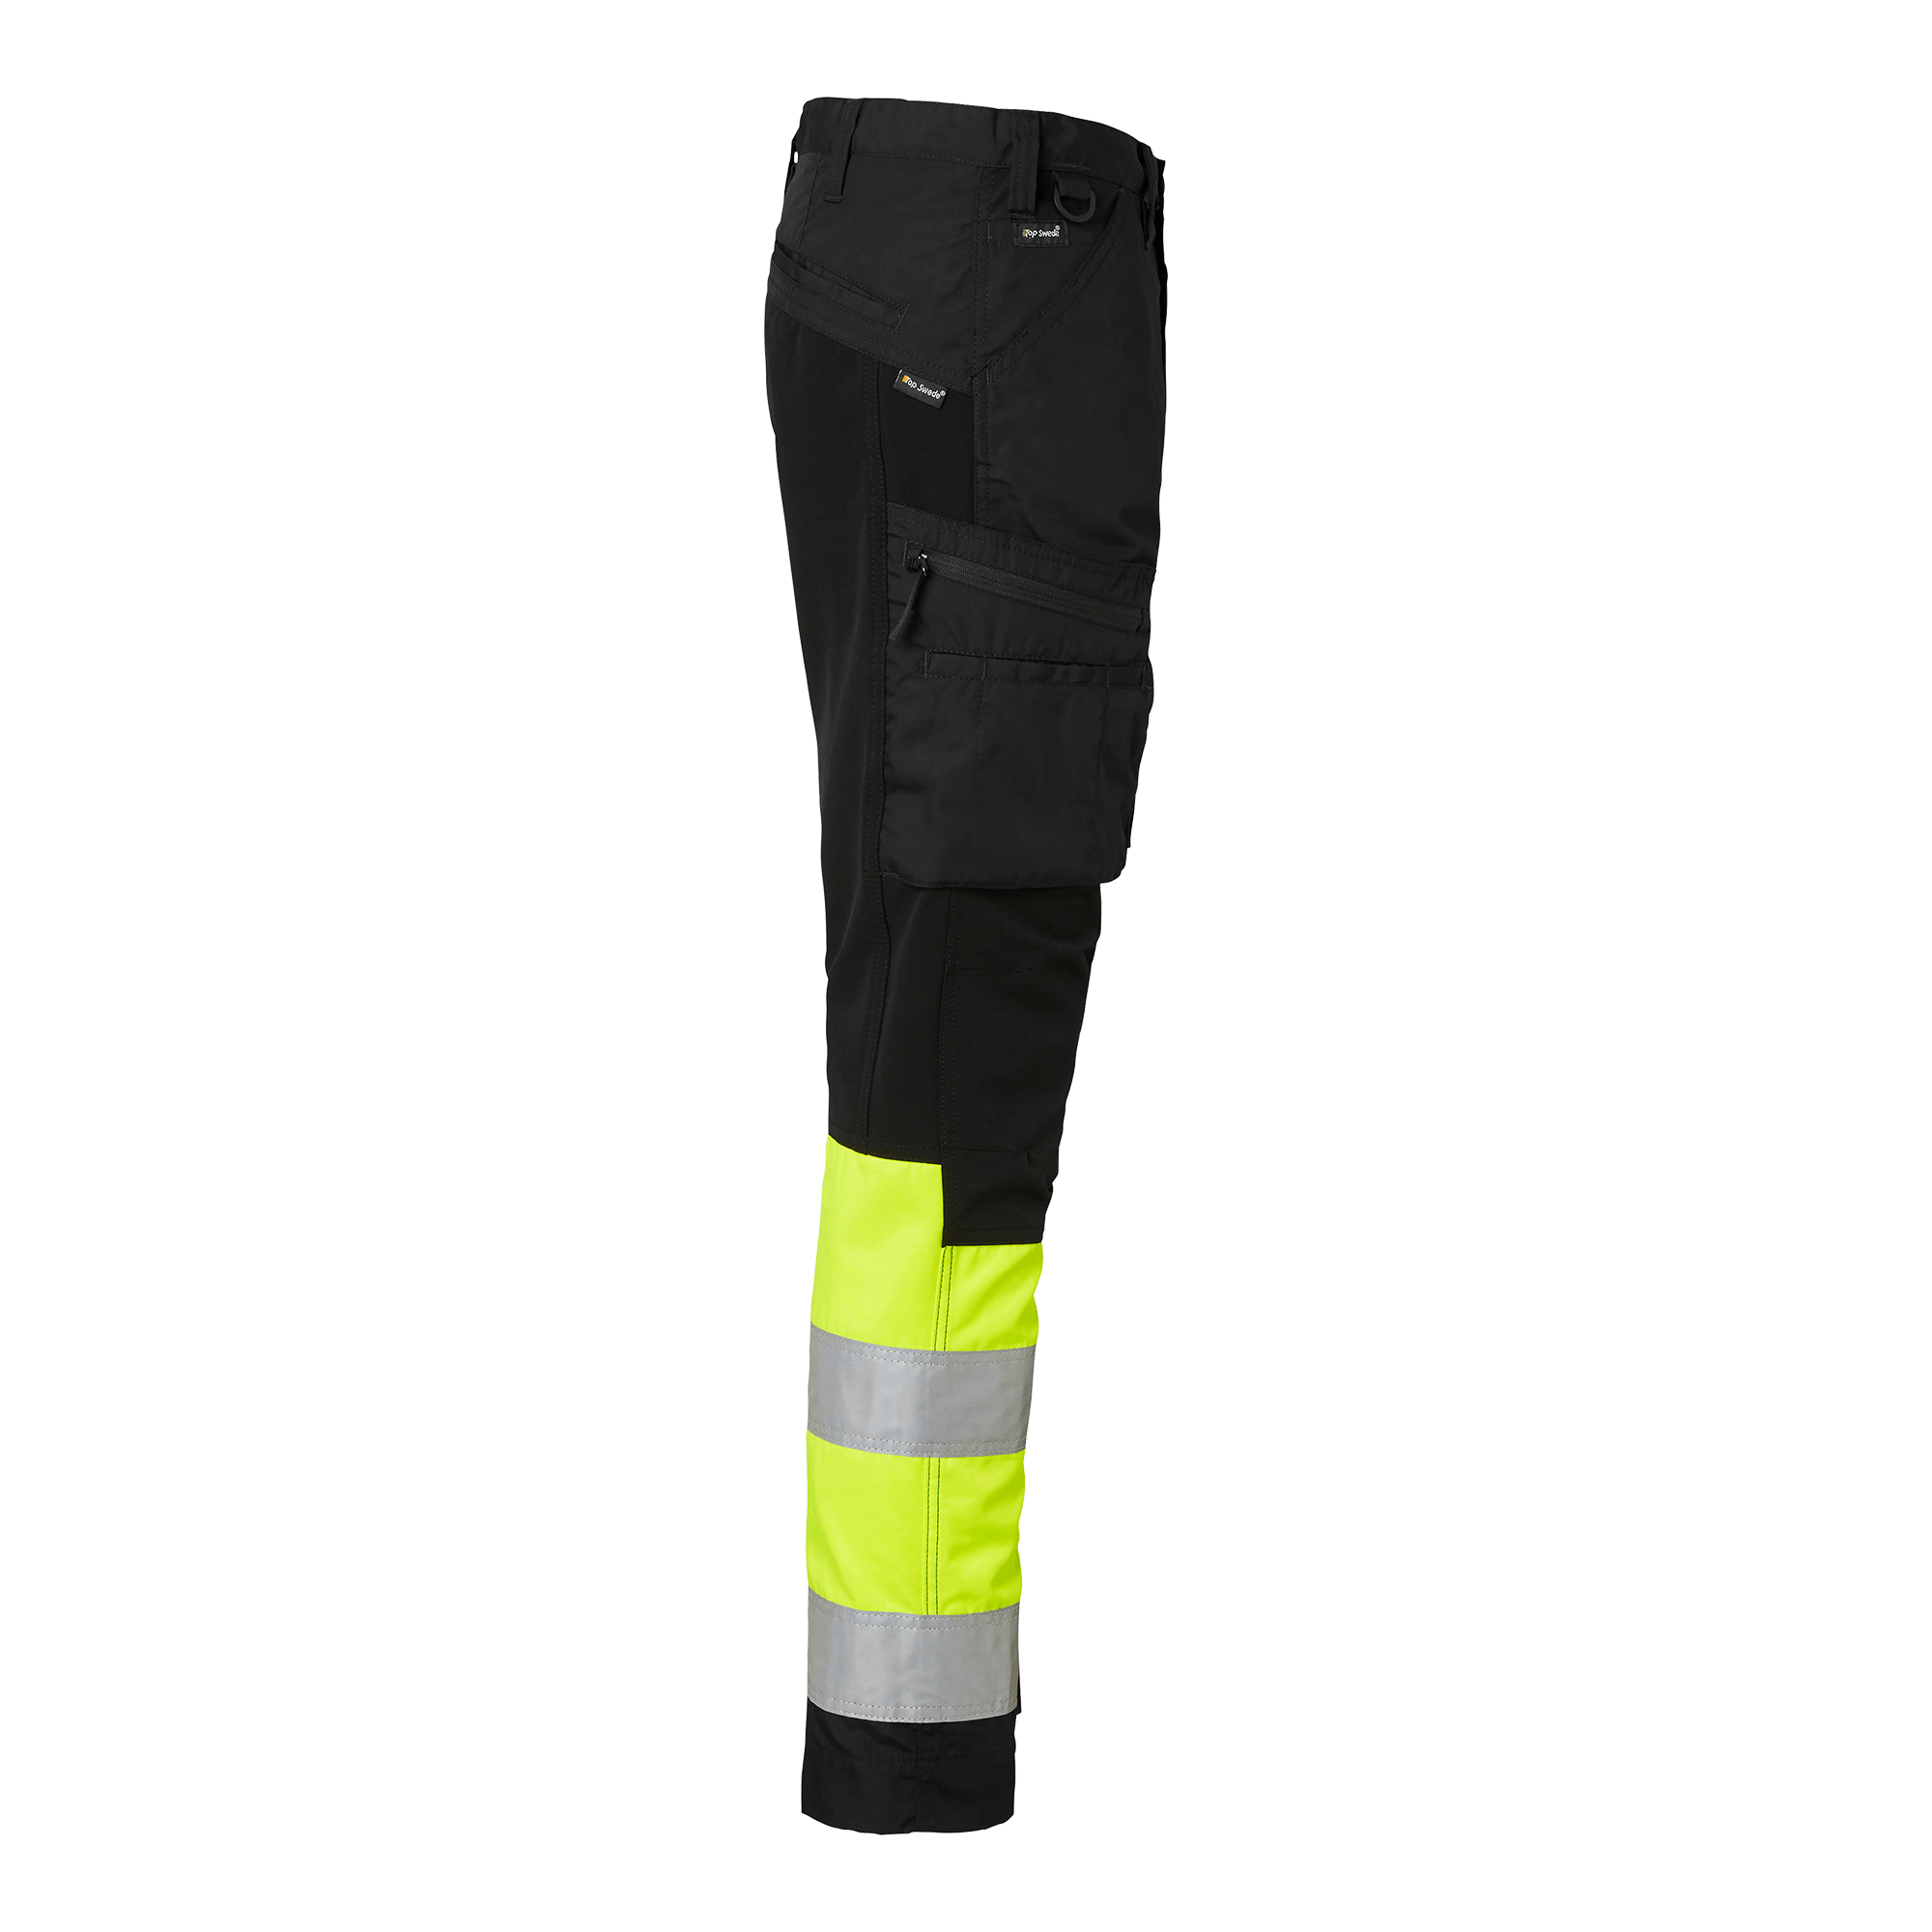 TOP SWEDE Service Trousers Black/Flourescent Yellow